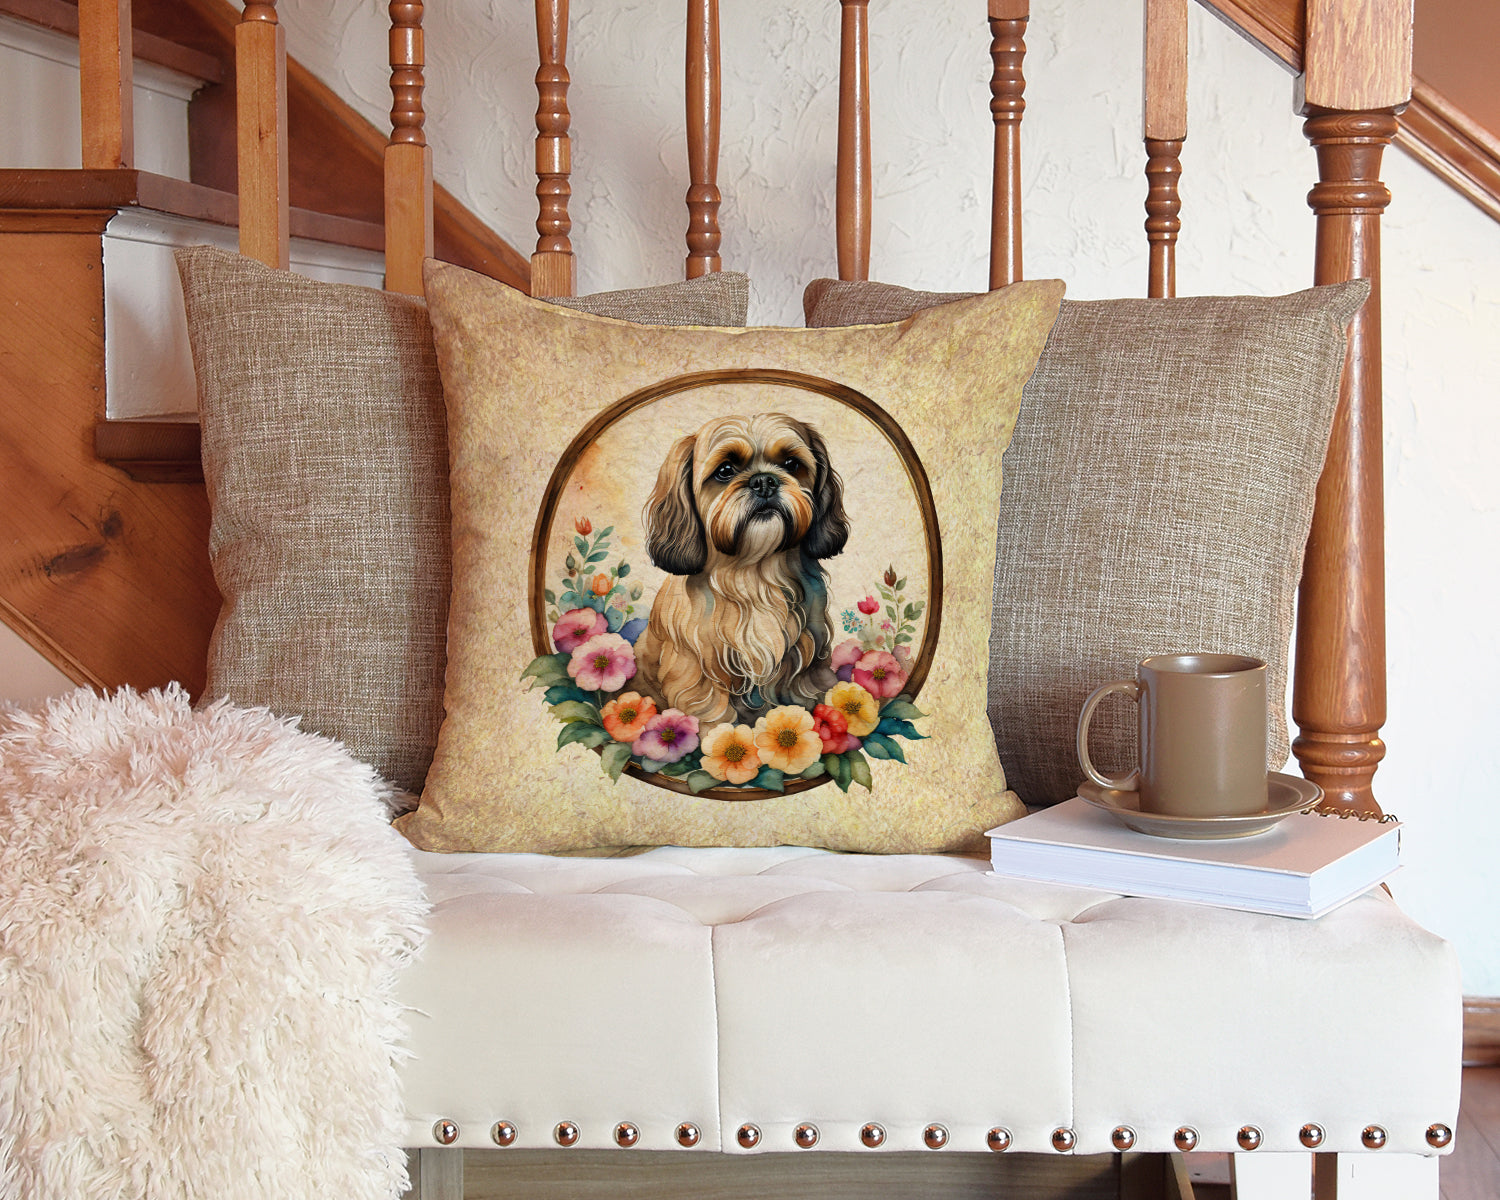 Lhasa Apso and Flowers Fabric Decorative Pillow